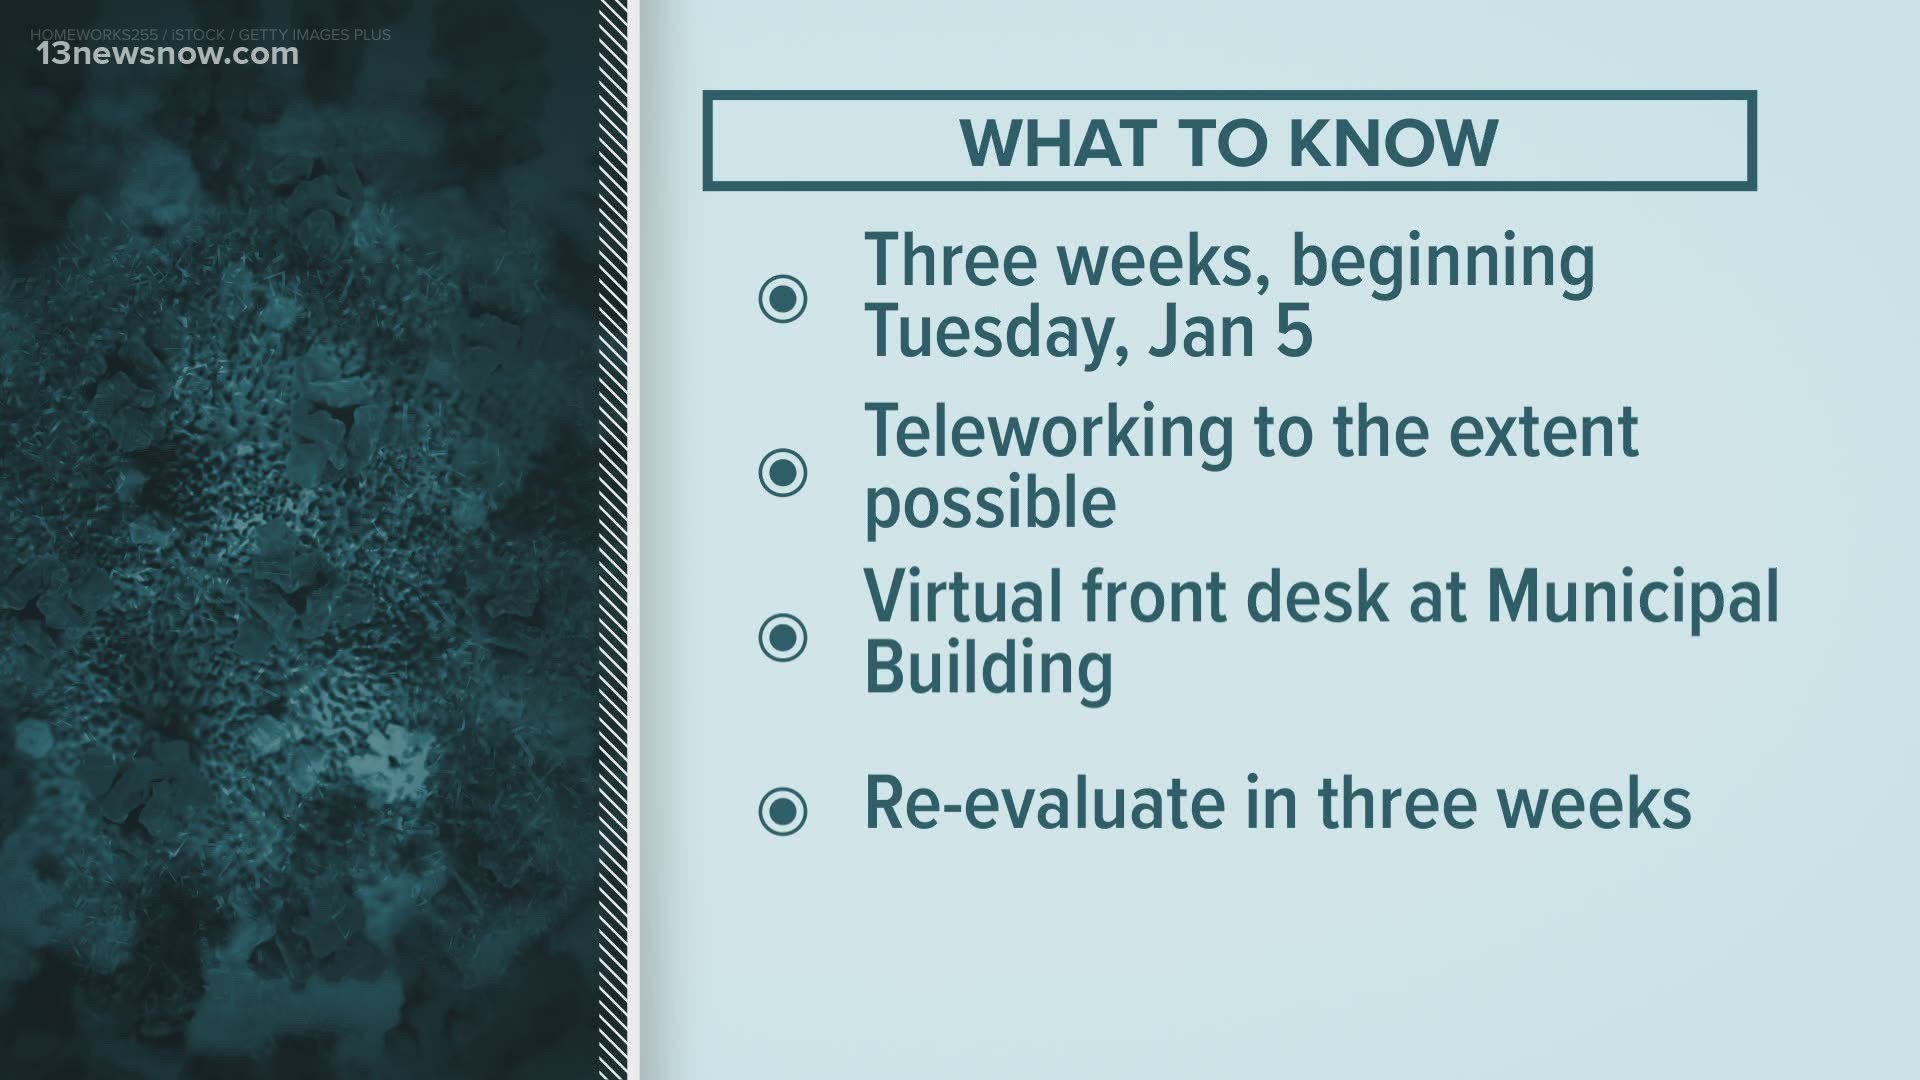 A virtual front desk will be set up in the Municipal Building if there's any business that you need to do in-person. The city will re-evaluate in three weeks.